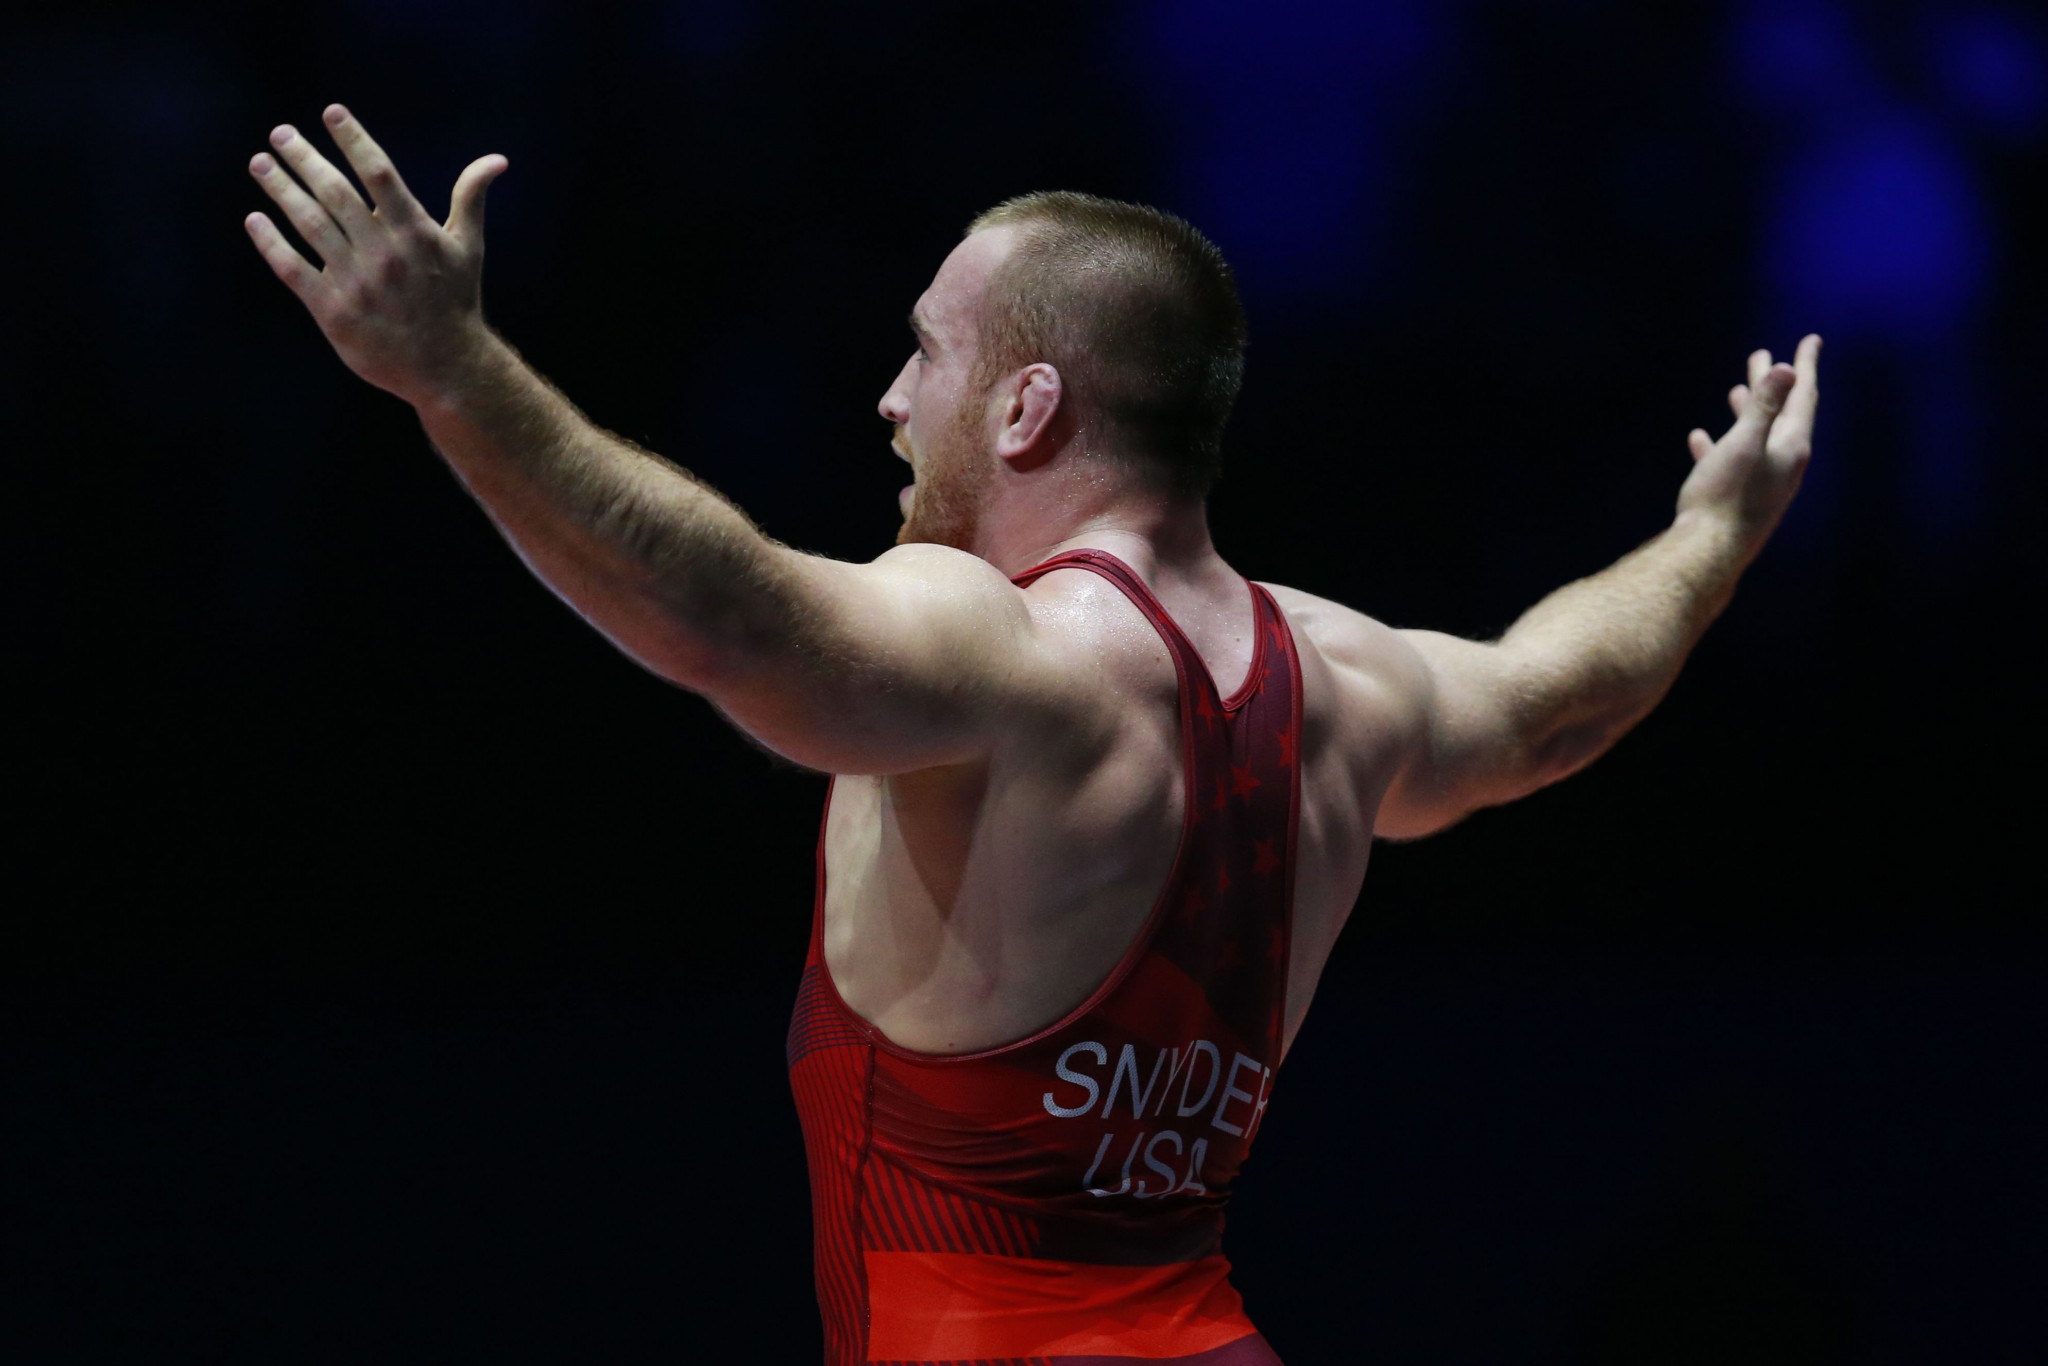 Kyle Snyder won US gold on the last day of the event ©Getty Images